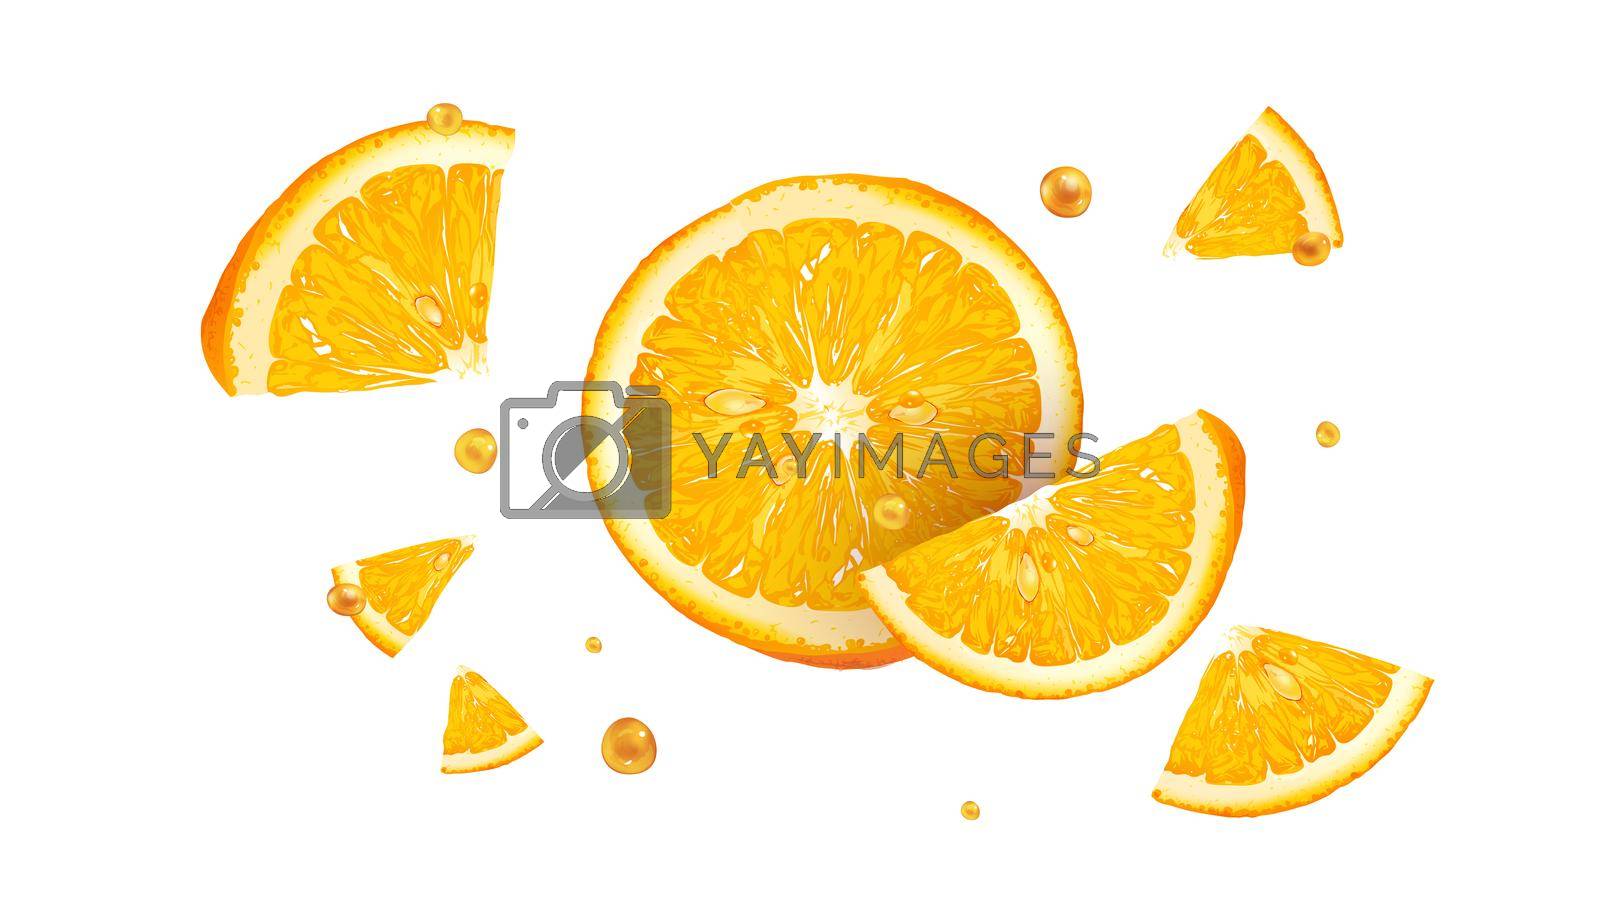 Royalty free image of Slices of fresh orange with drops of juice in flight. by ConceptCafe